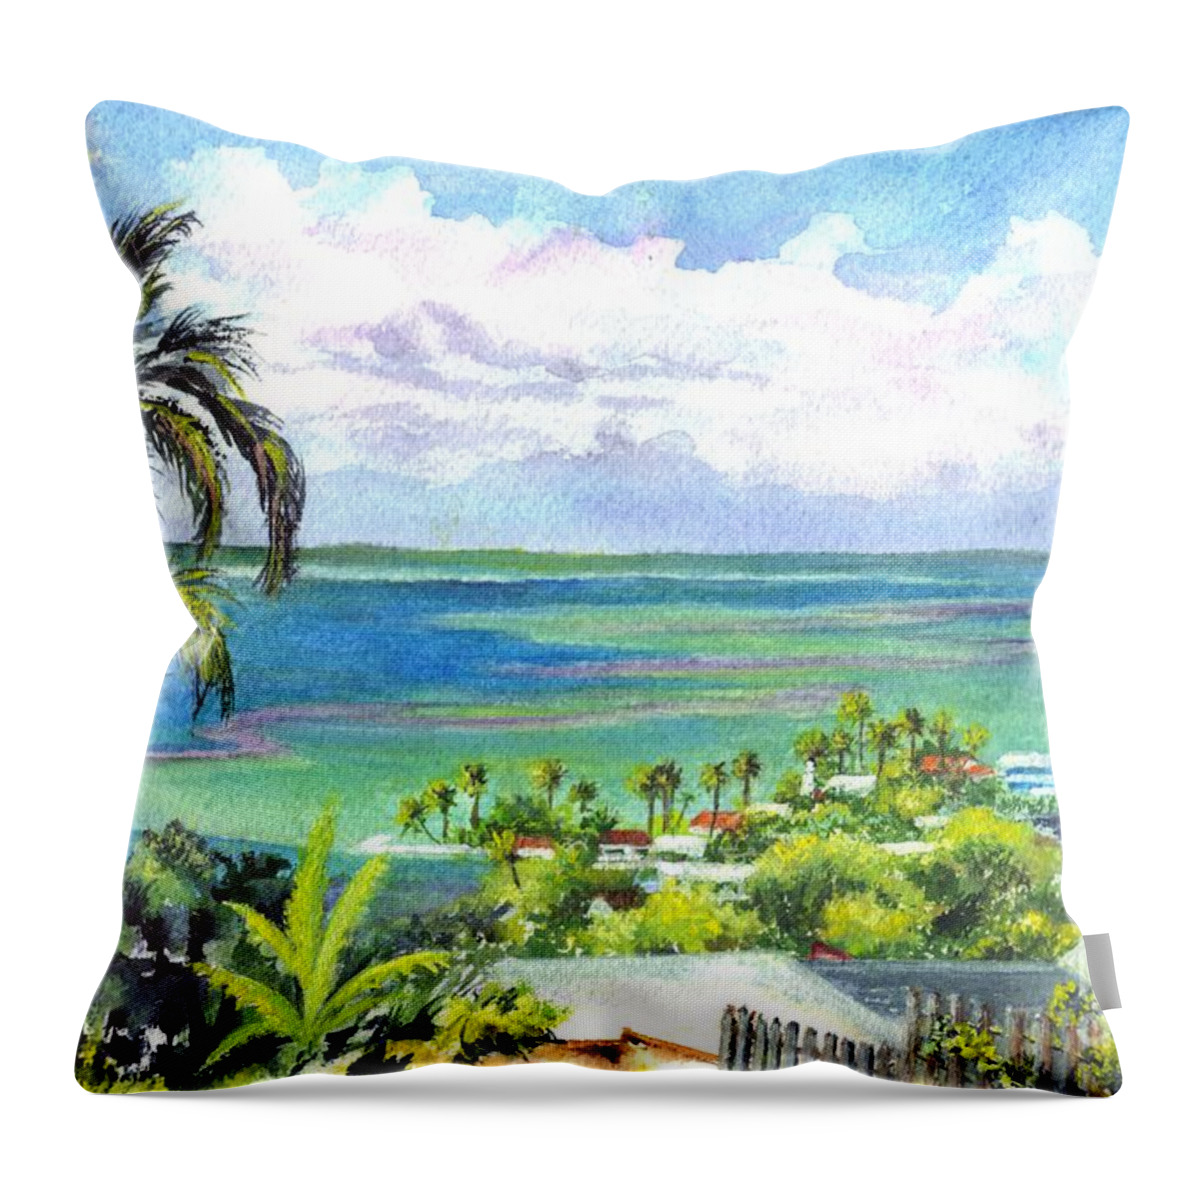 Hawaii Throw Pillow featuring the painting Shores of Oahu by Carol Wisniewski